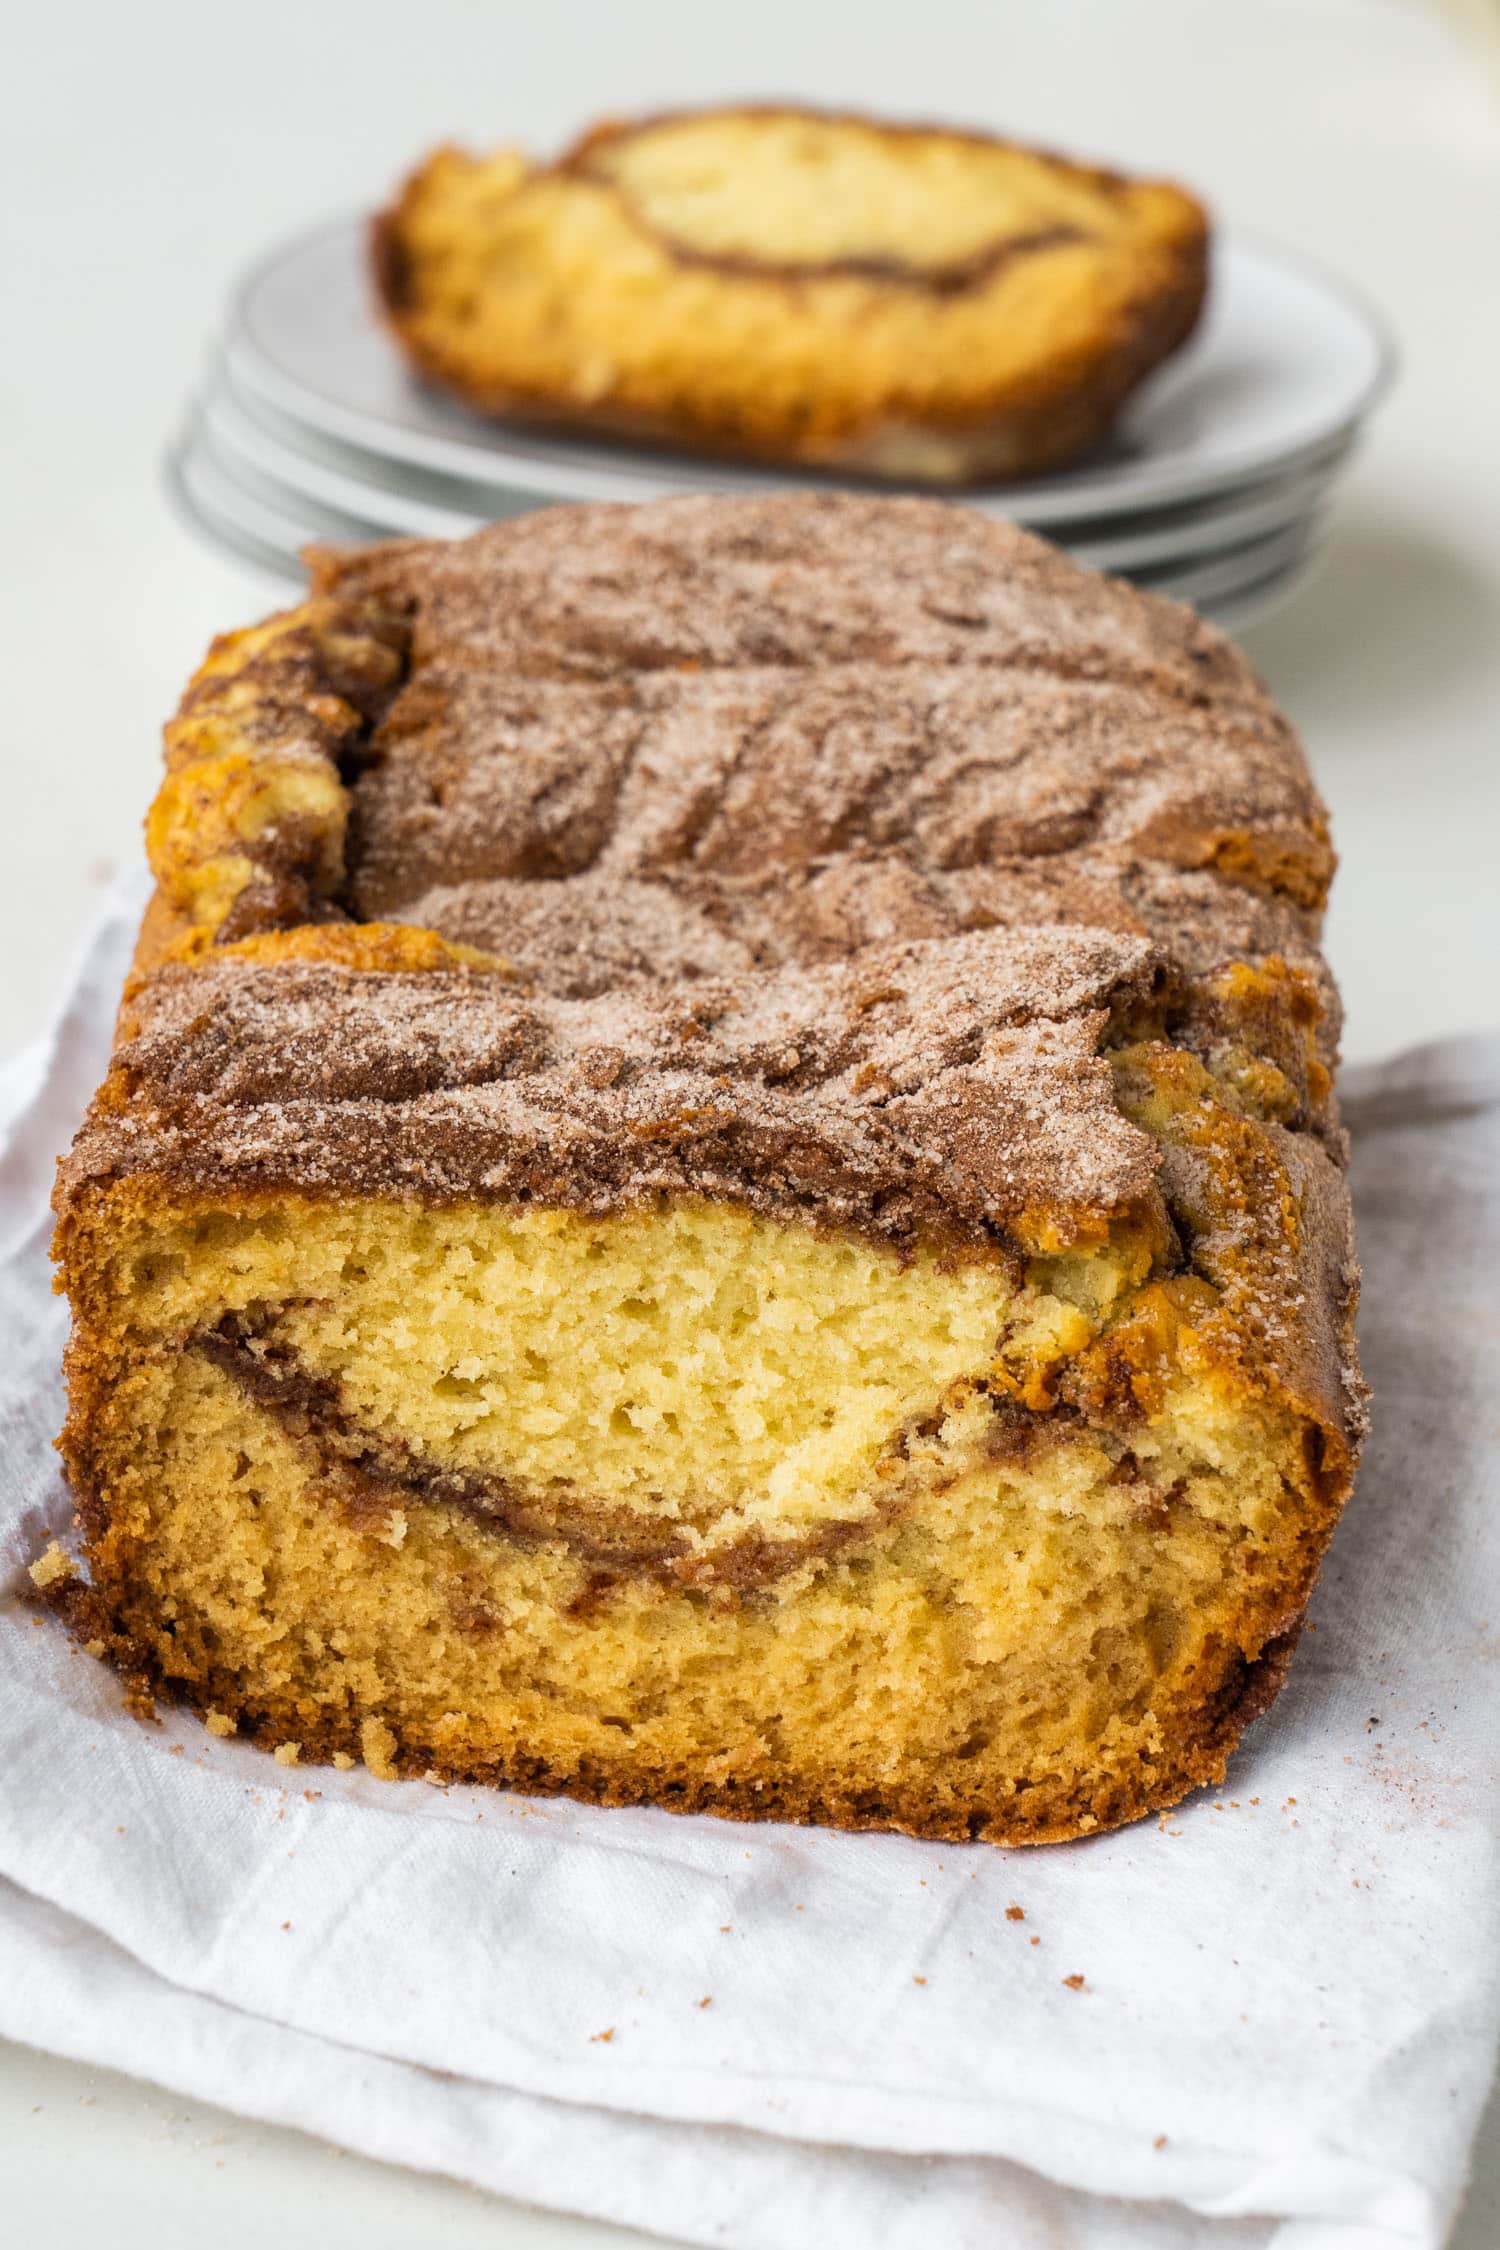 Best Cinnamon Bread Recipe (The Perfect Holiday Gift)